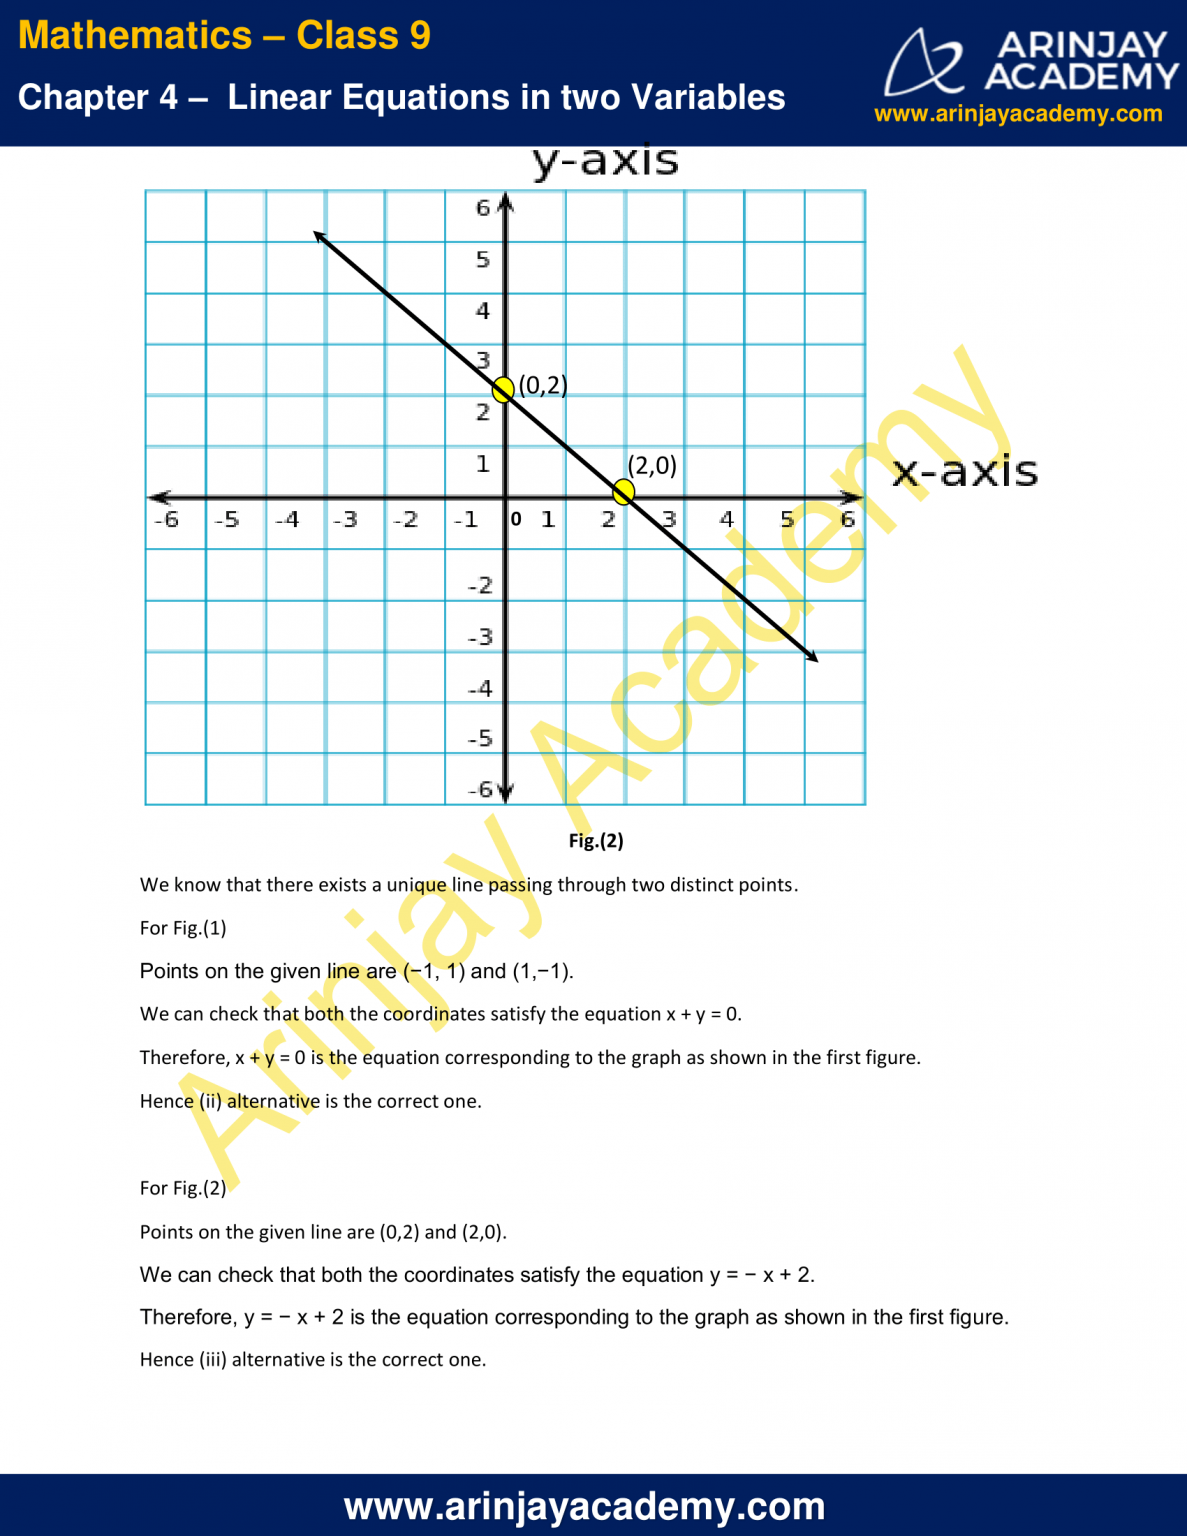 ncert solutions class 9 maths linear equations in two variables 4.3